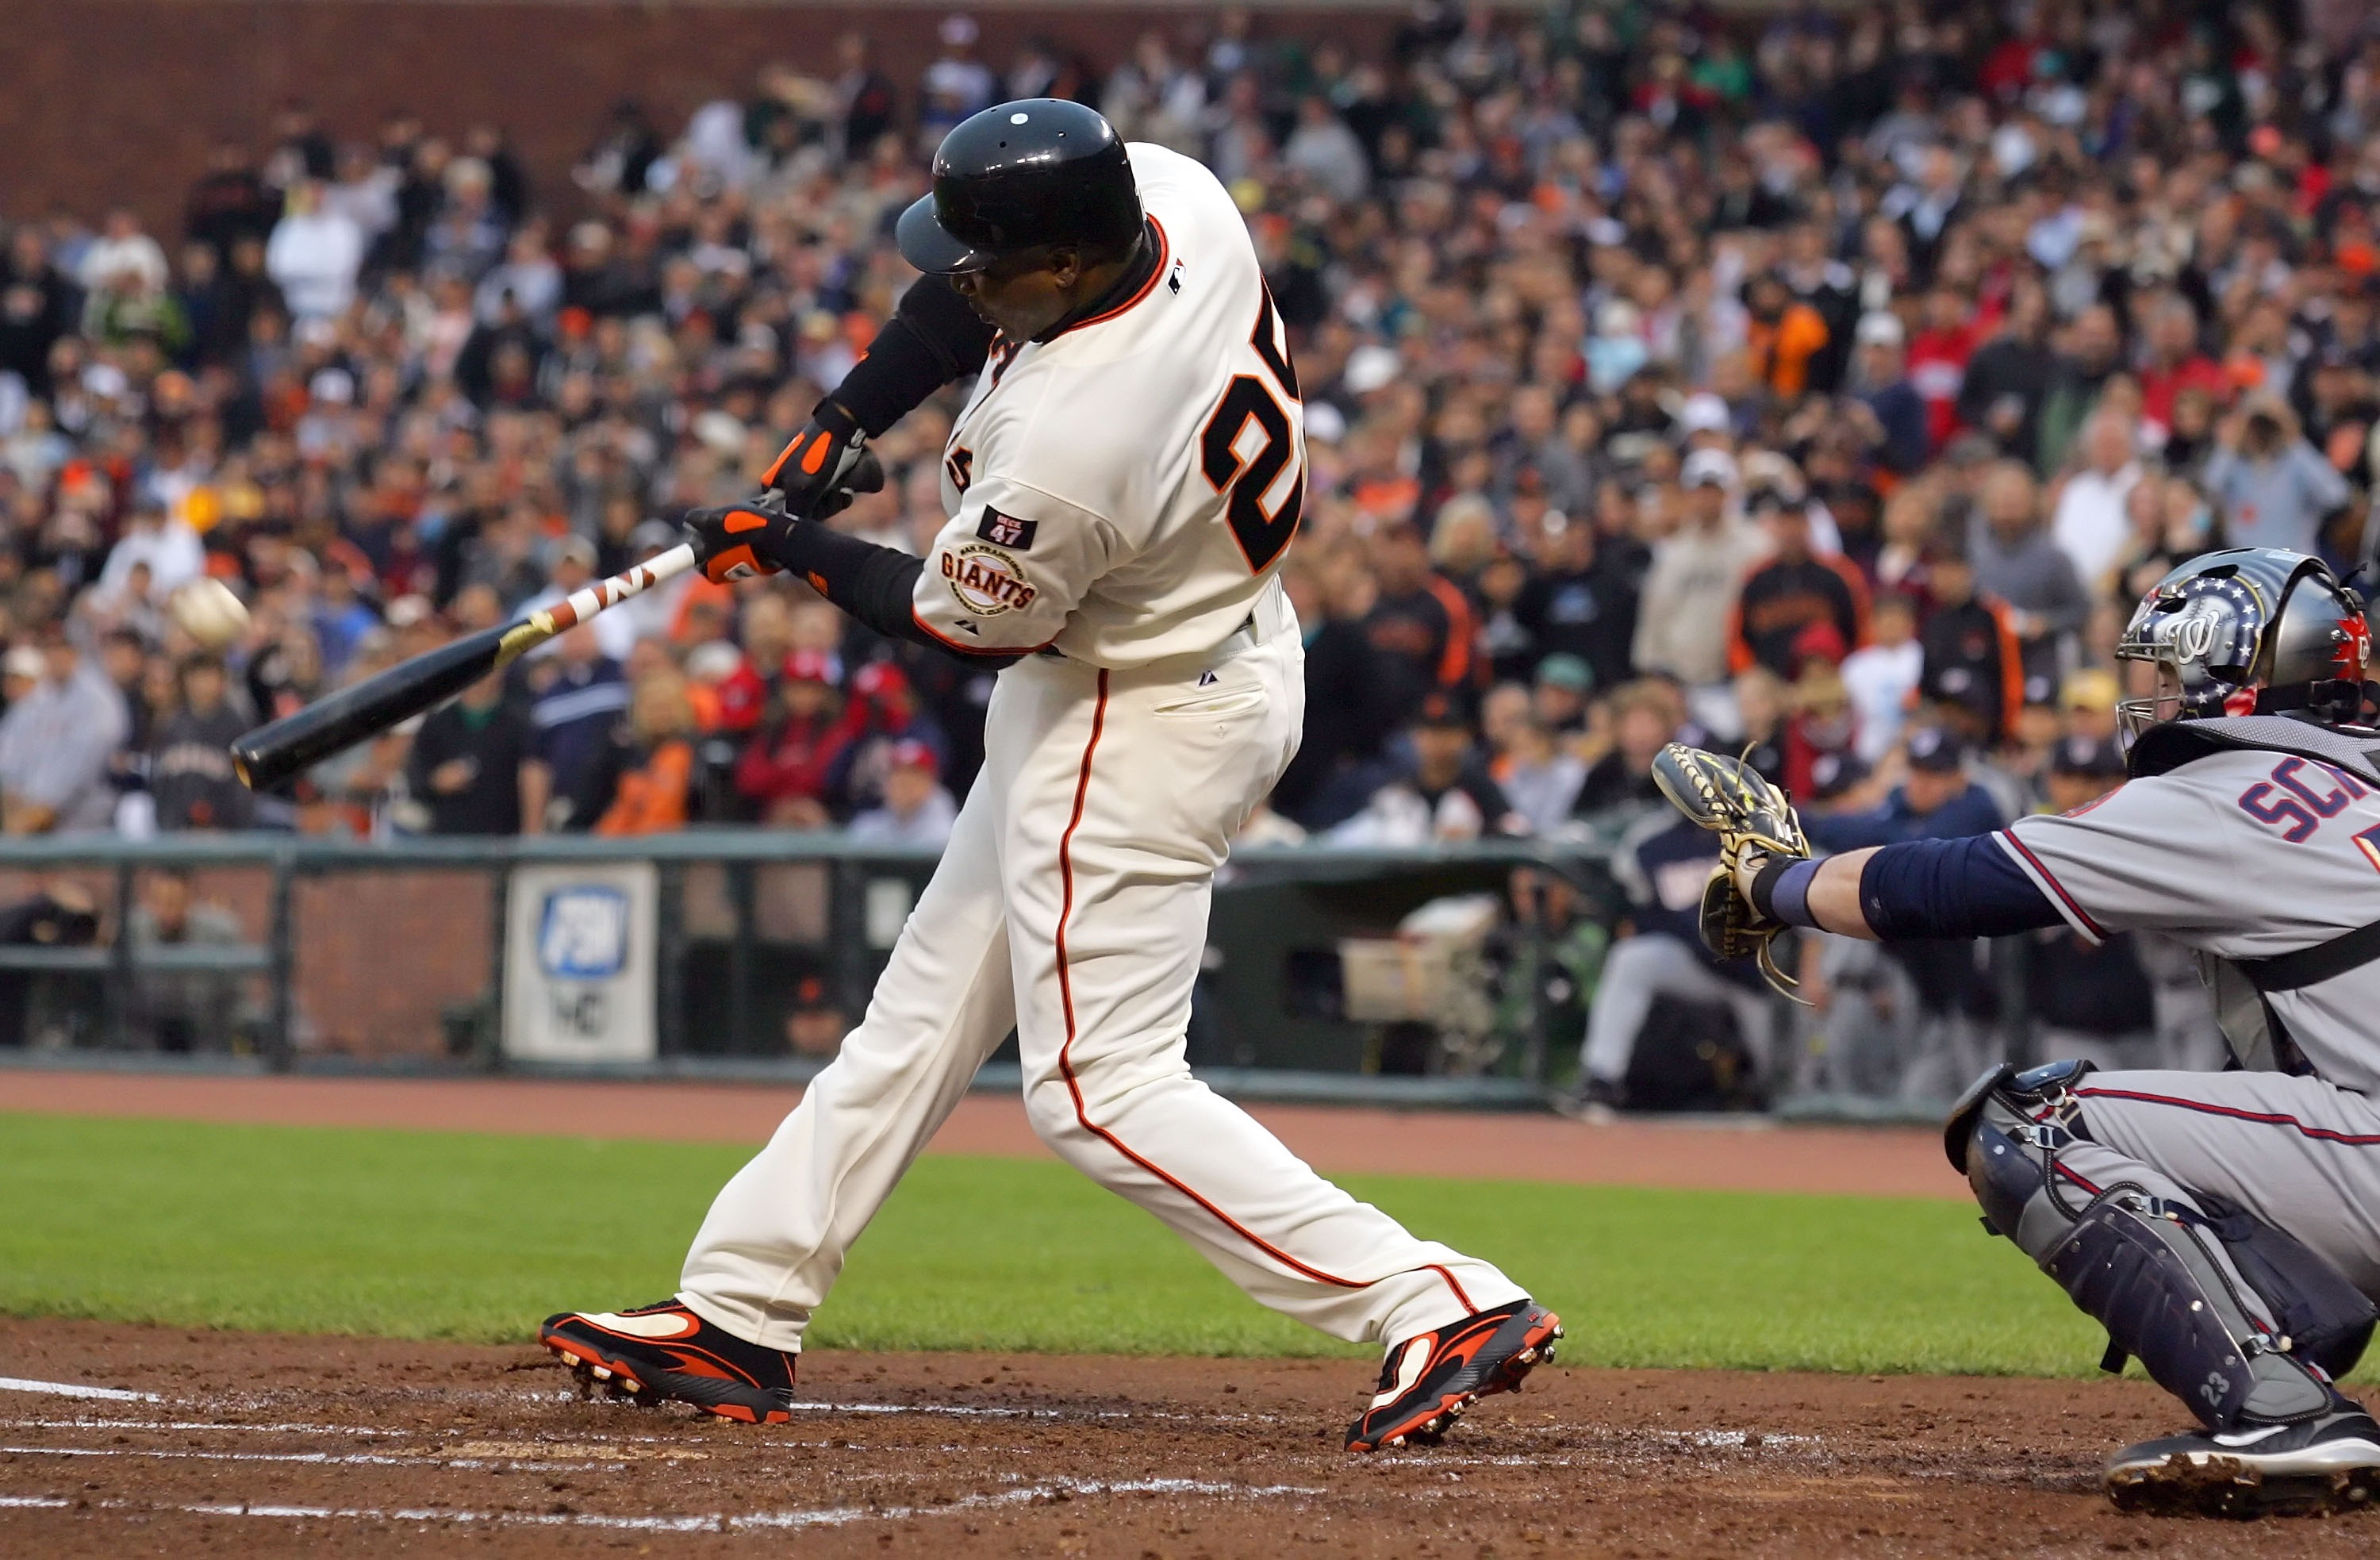 There's no good reason to keep Barry Bonds out of the Hall of Fame